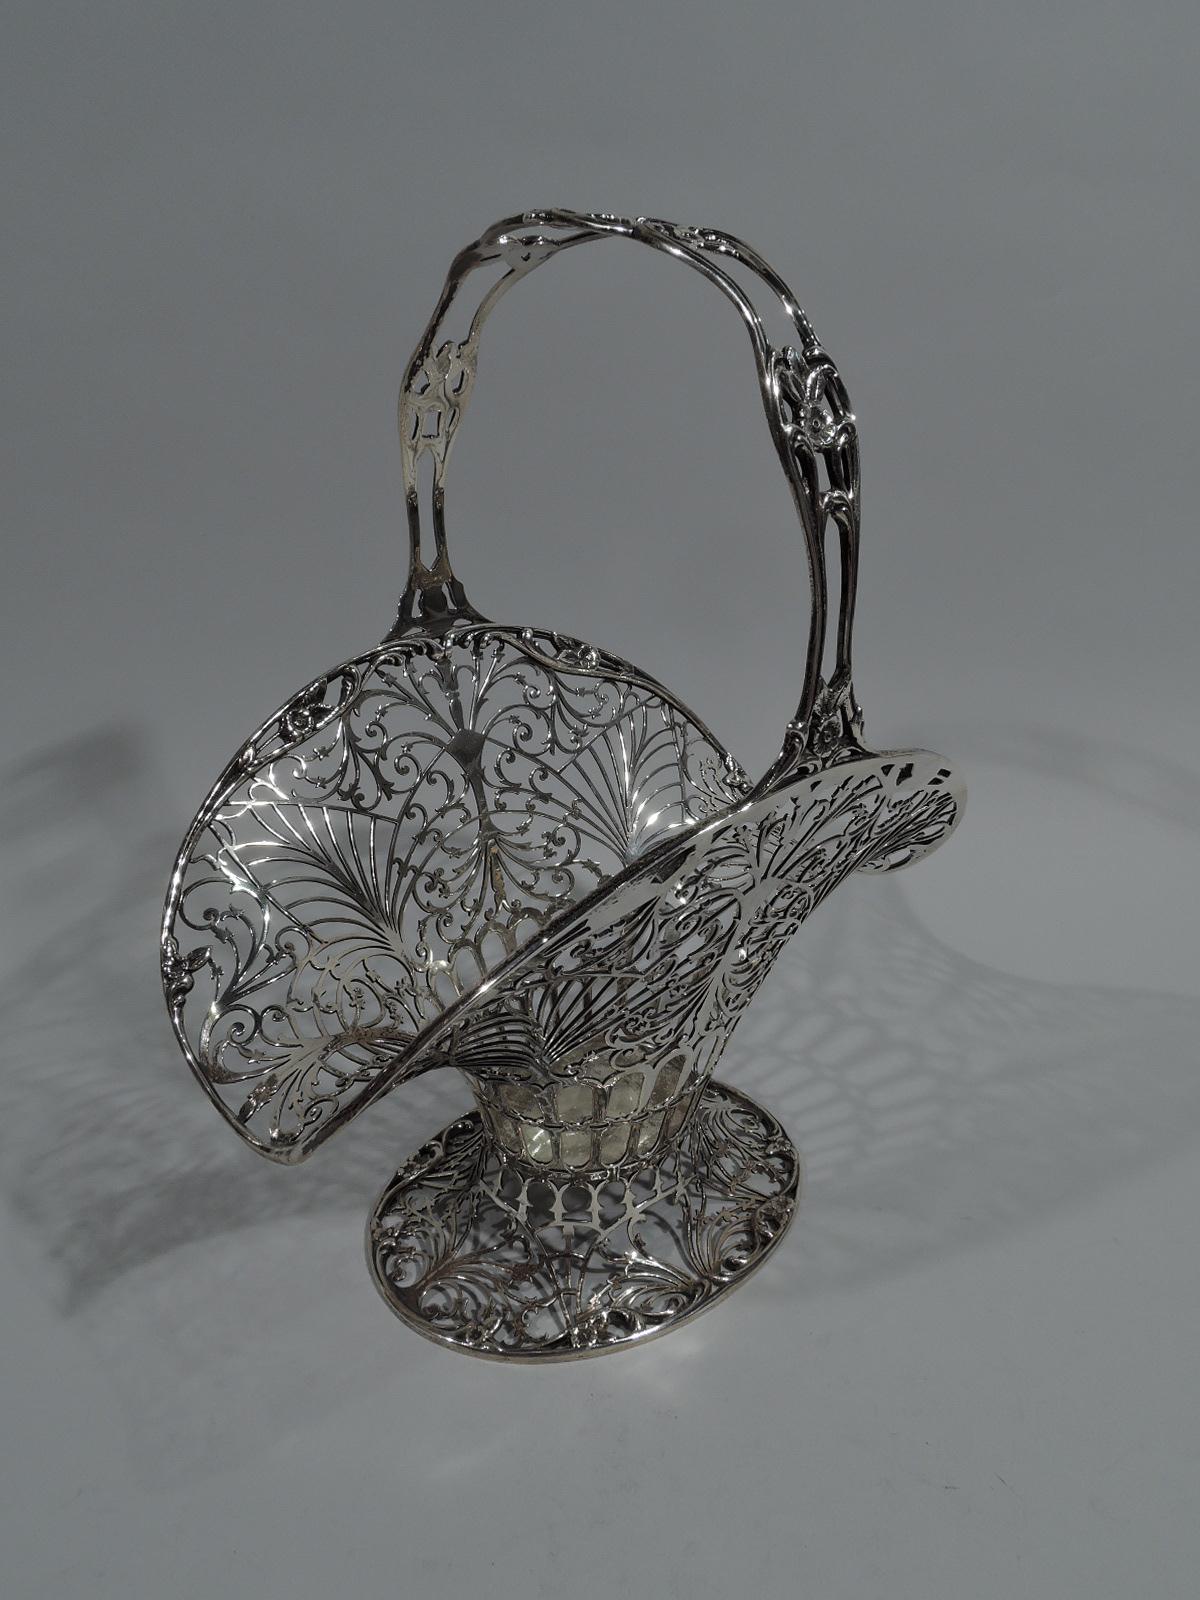 Fancy sterling silver basket. Made by Howard & Co. in New York, 1905. Tapering and oval body on raised and oval foot. Wide and flared mouth. Stationery handle. Pierced and open scrollwork. Chased flowers on rim interior as well as handle. A